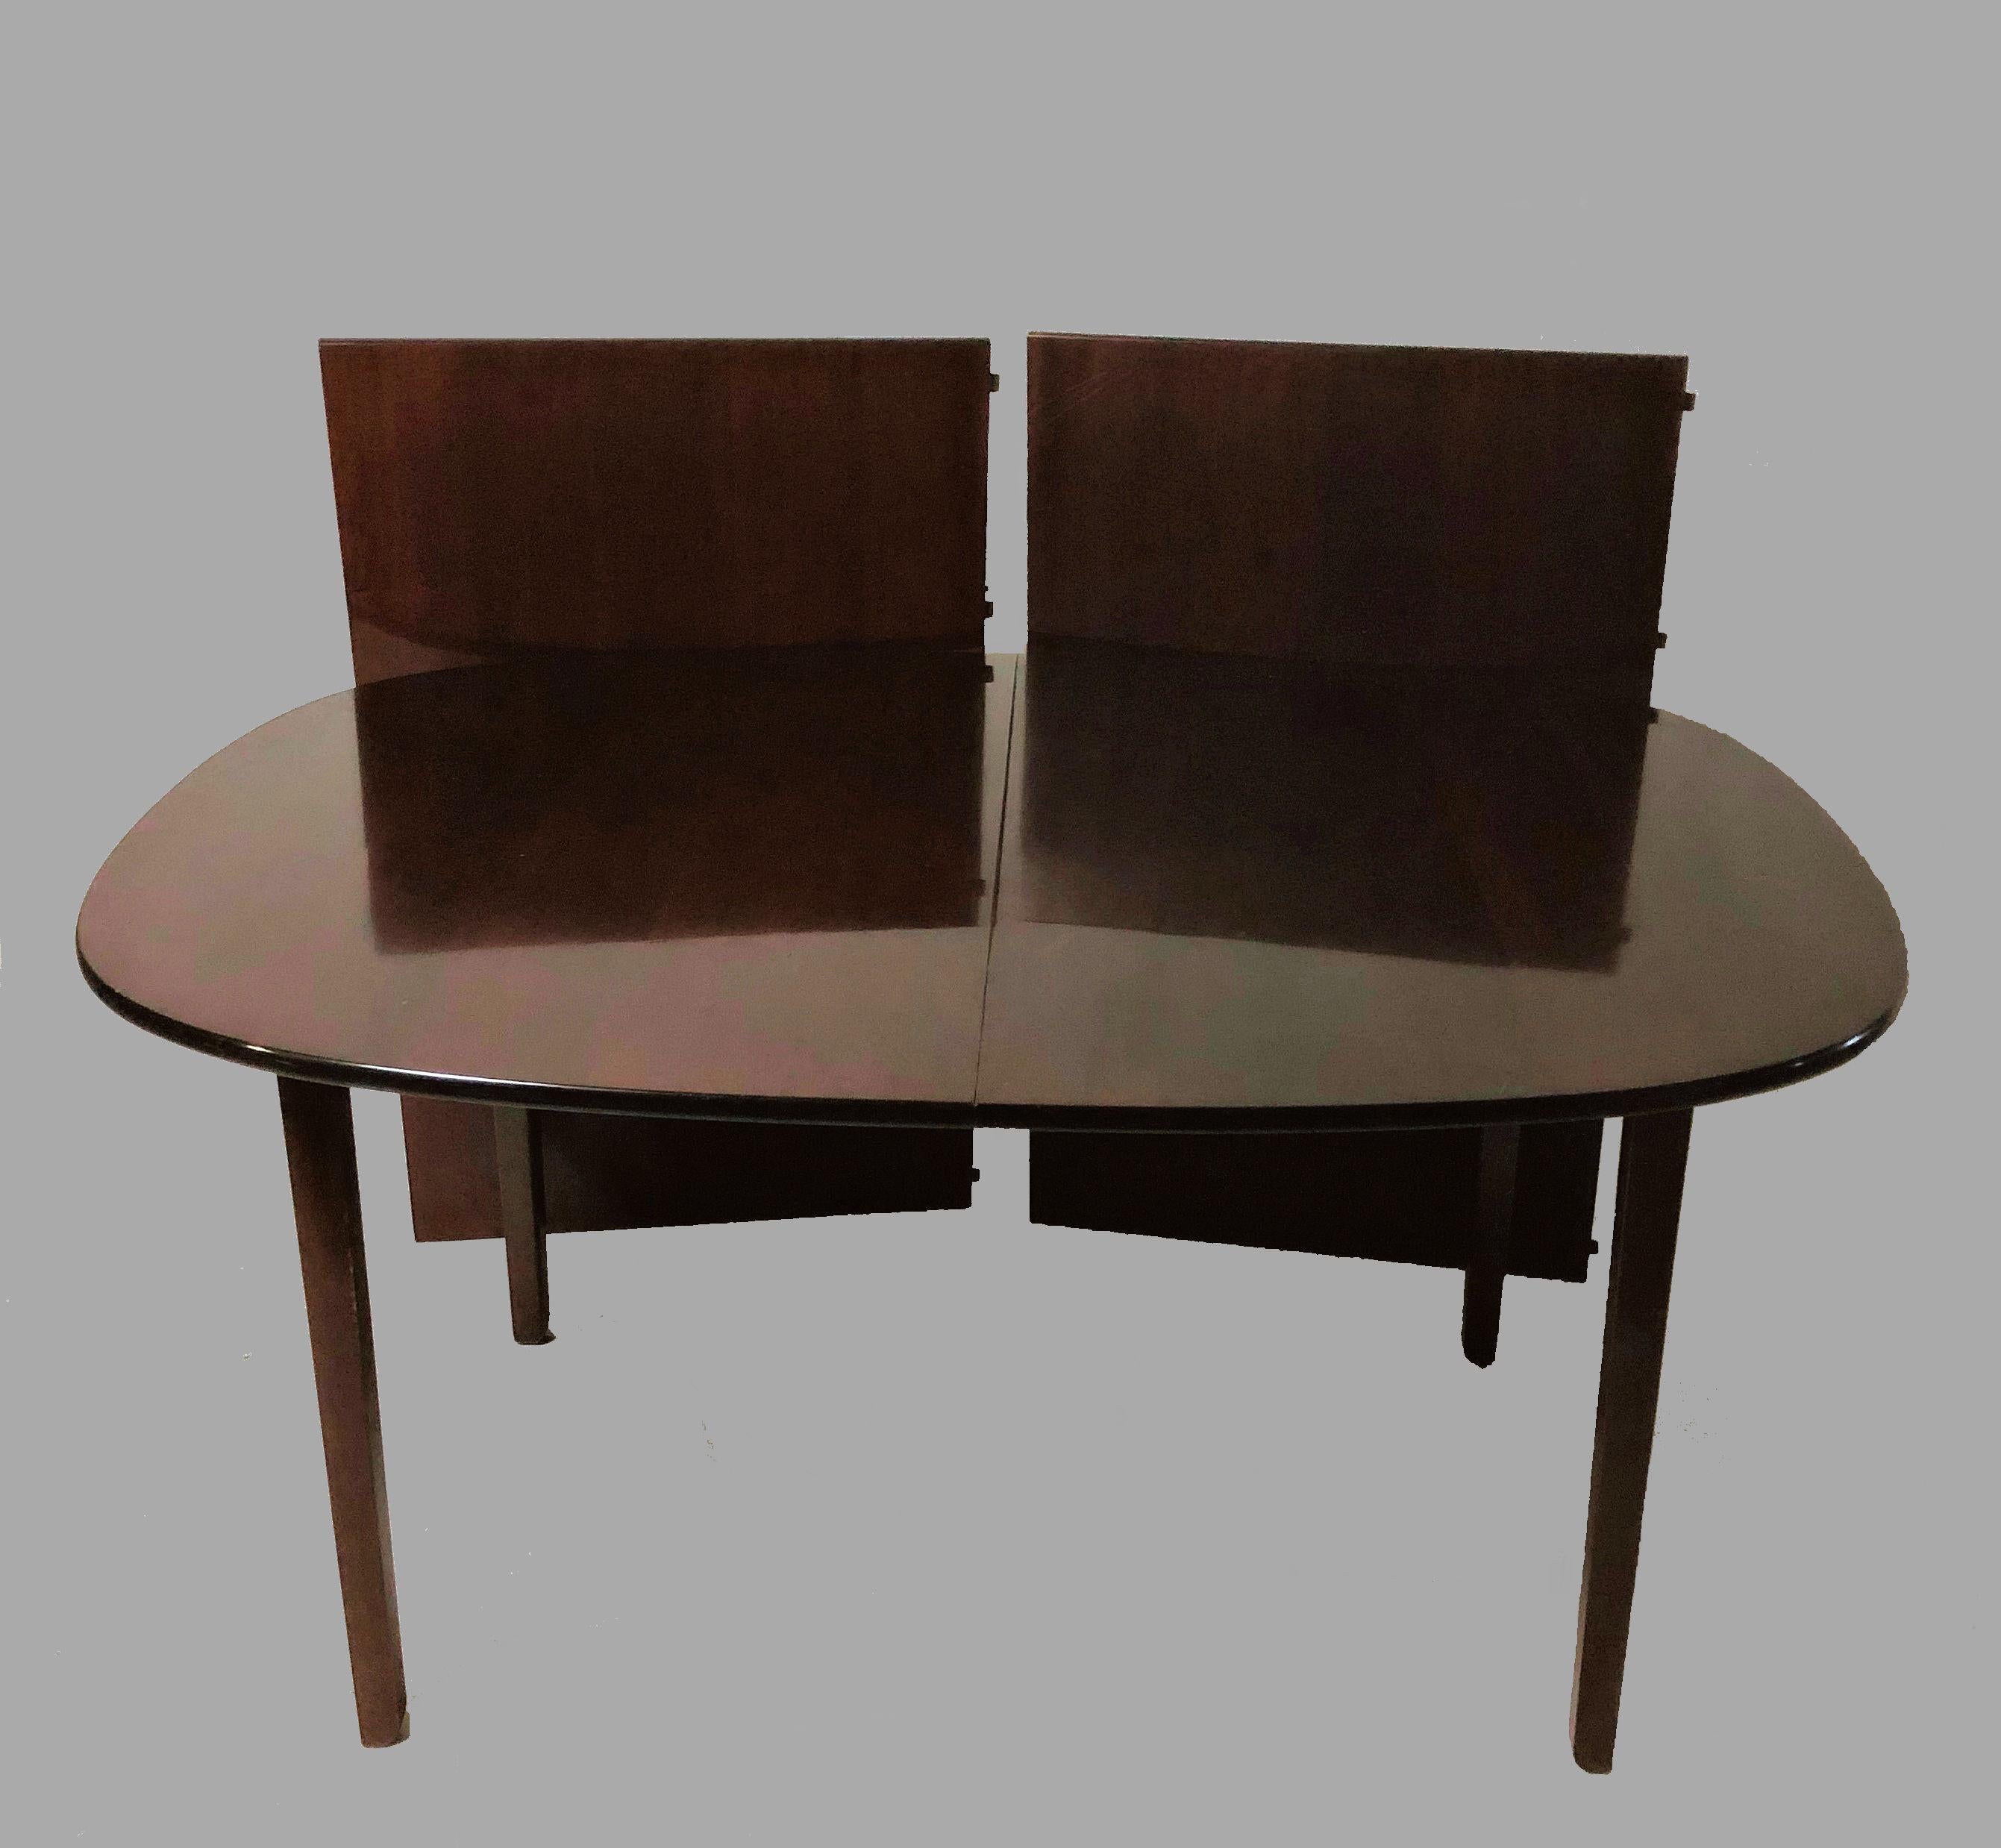 Expandable Ole Wanscher Rungstedlund dining table with two extra leaves by P. Jeppesen.

The dining table has been checked and refinished by our cabinetmaker and is in good condition.

Seizes cm./inch:
Dining table: H 73 / 28.74, W 155 /61 D 106 /